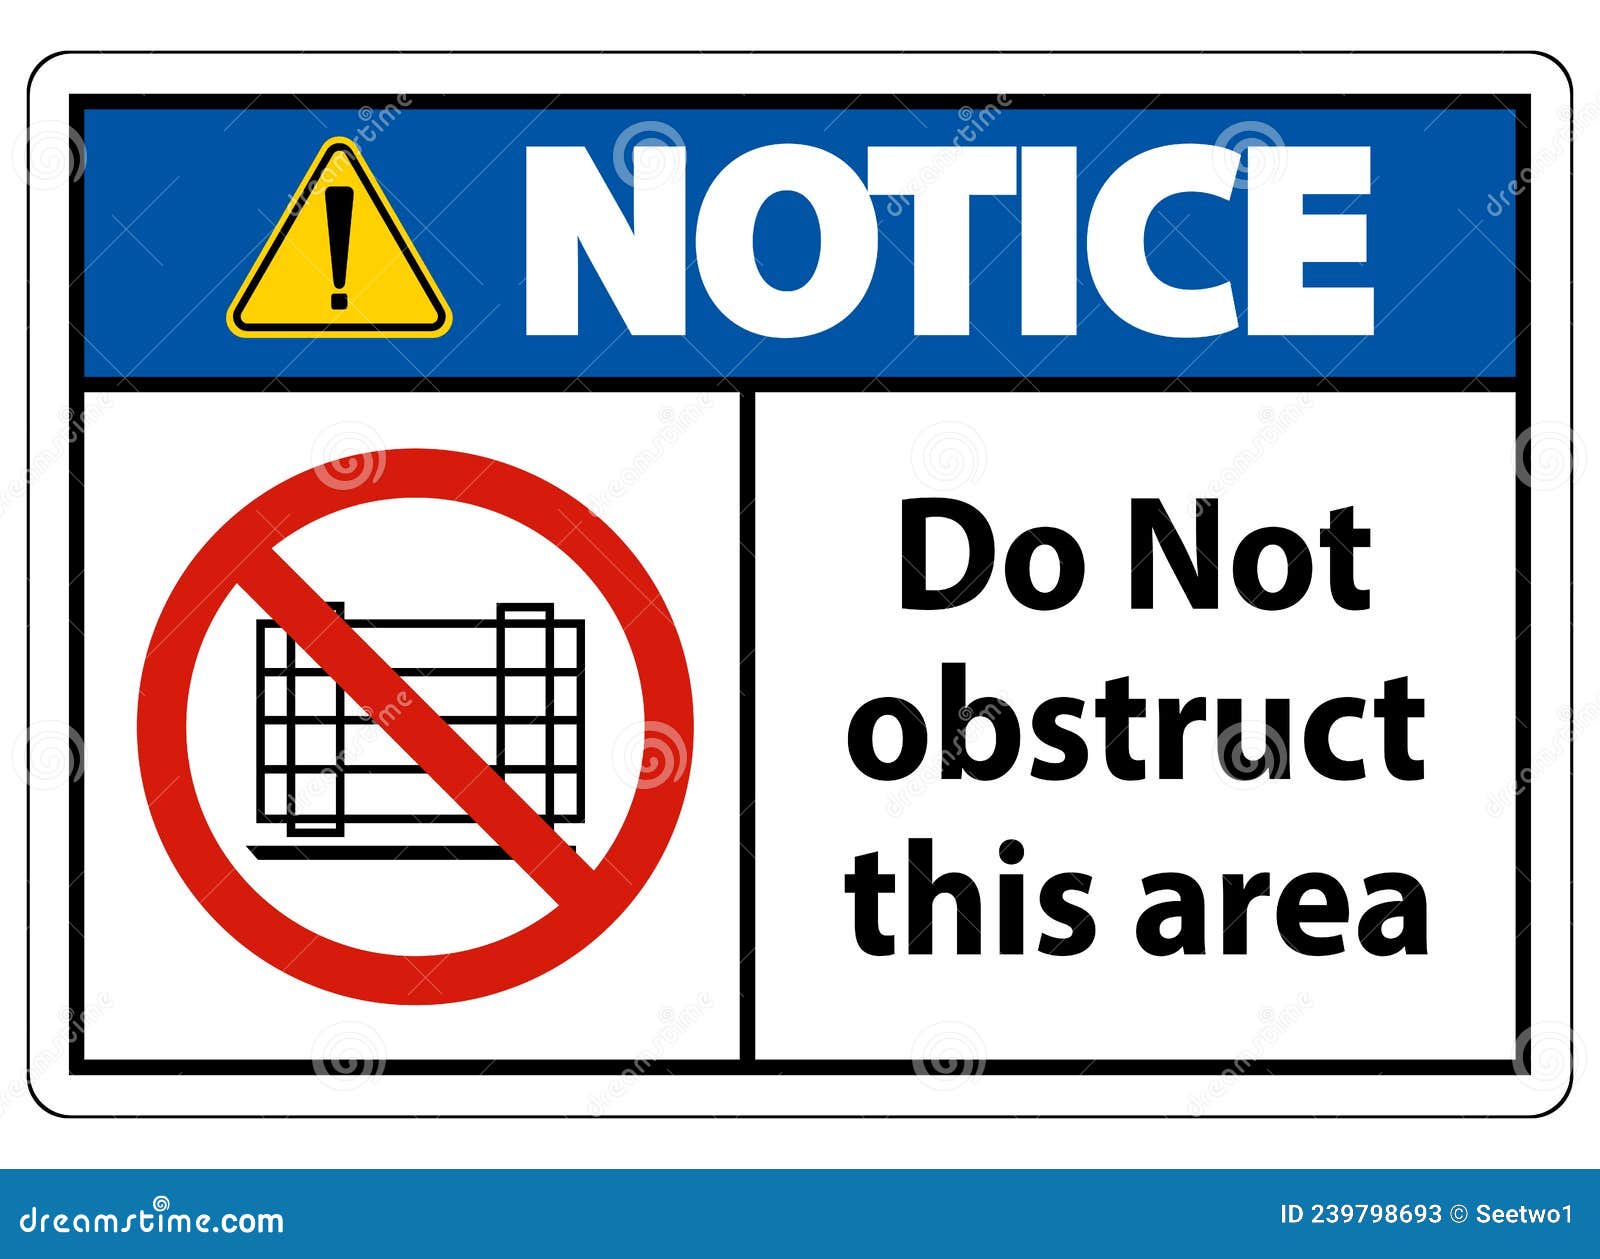 Notice Do Not Obstruct this Area Signs Stock Vector - Illustration of ...